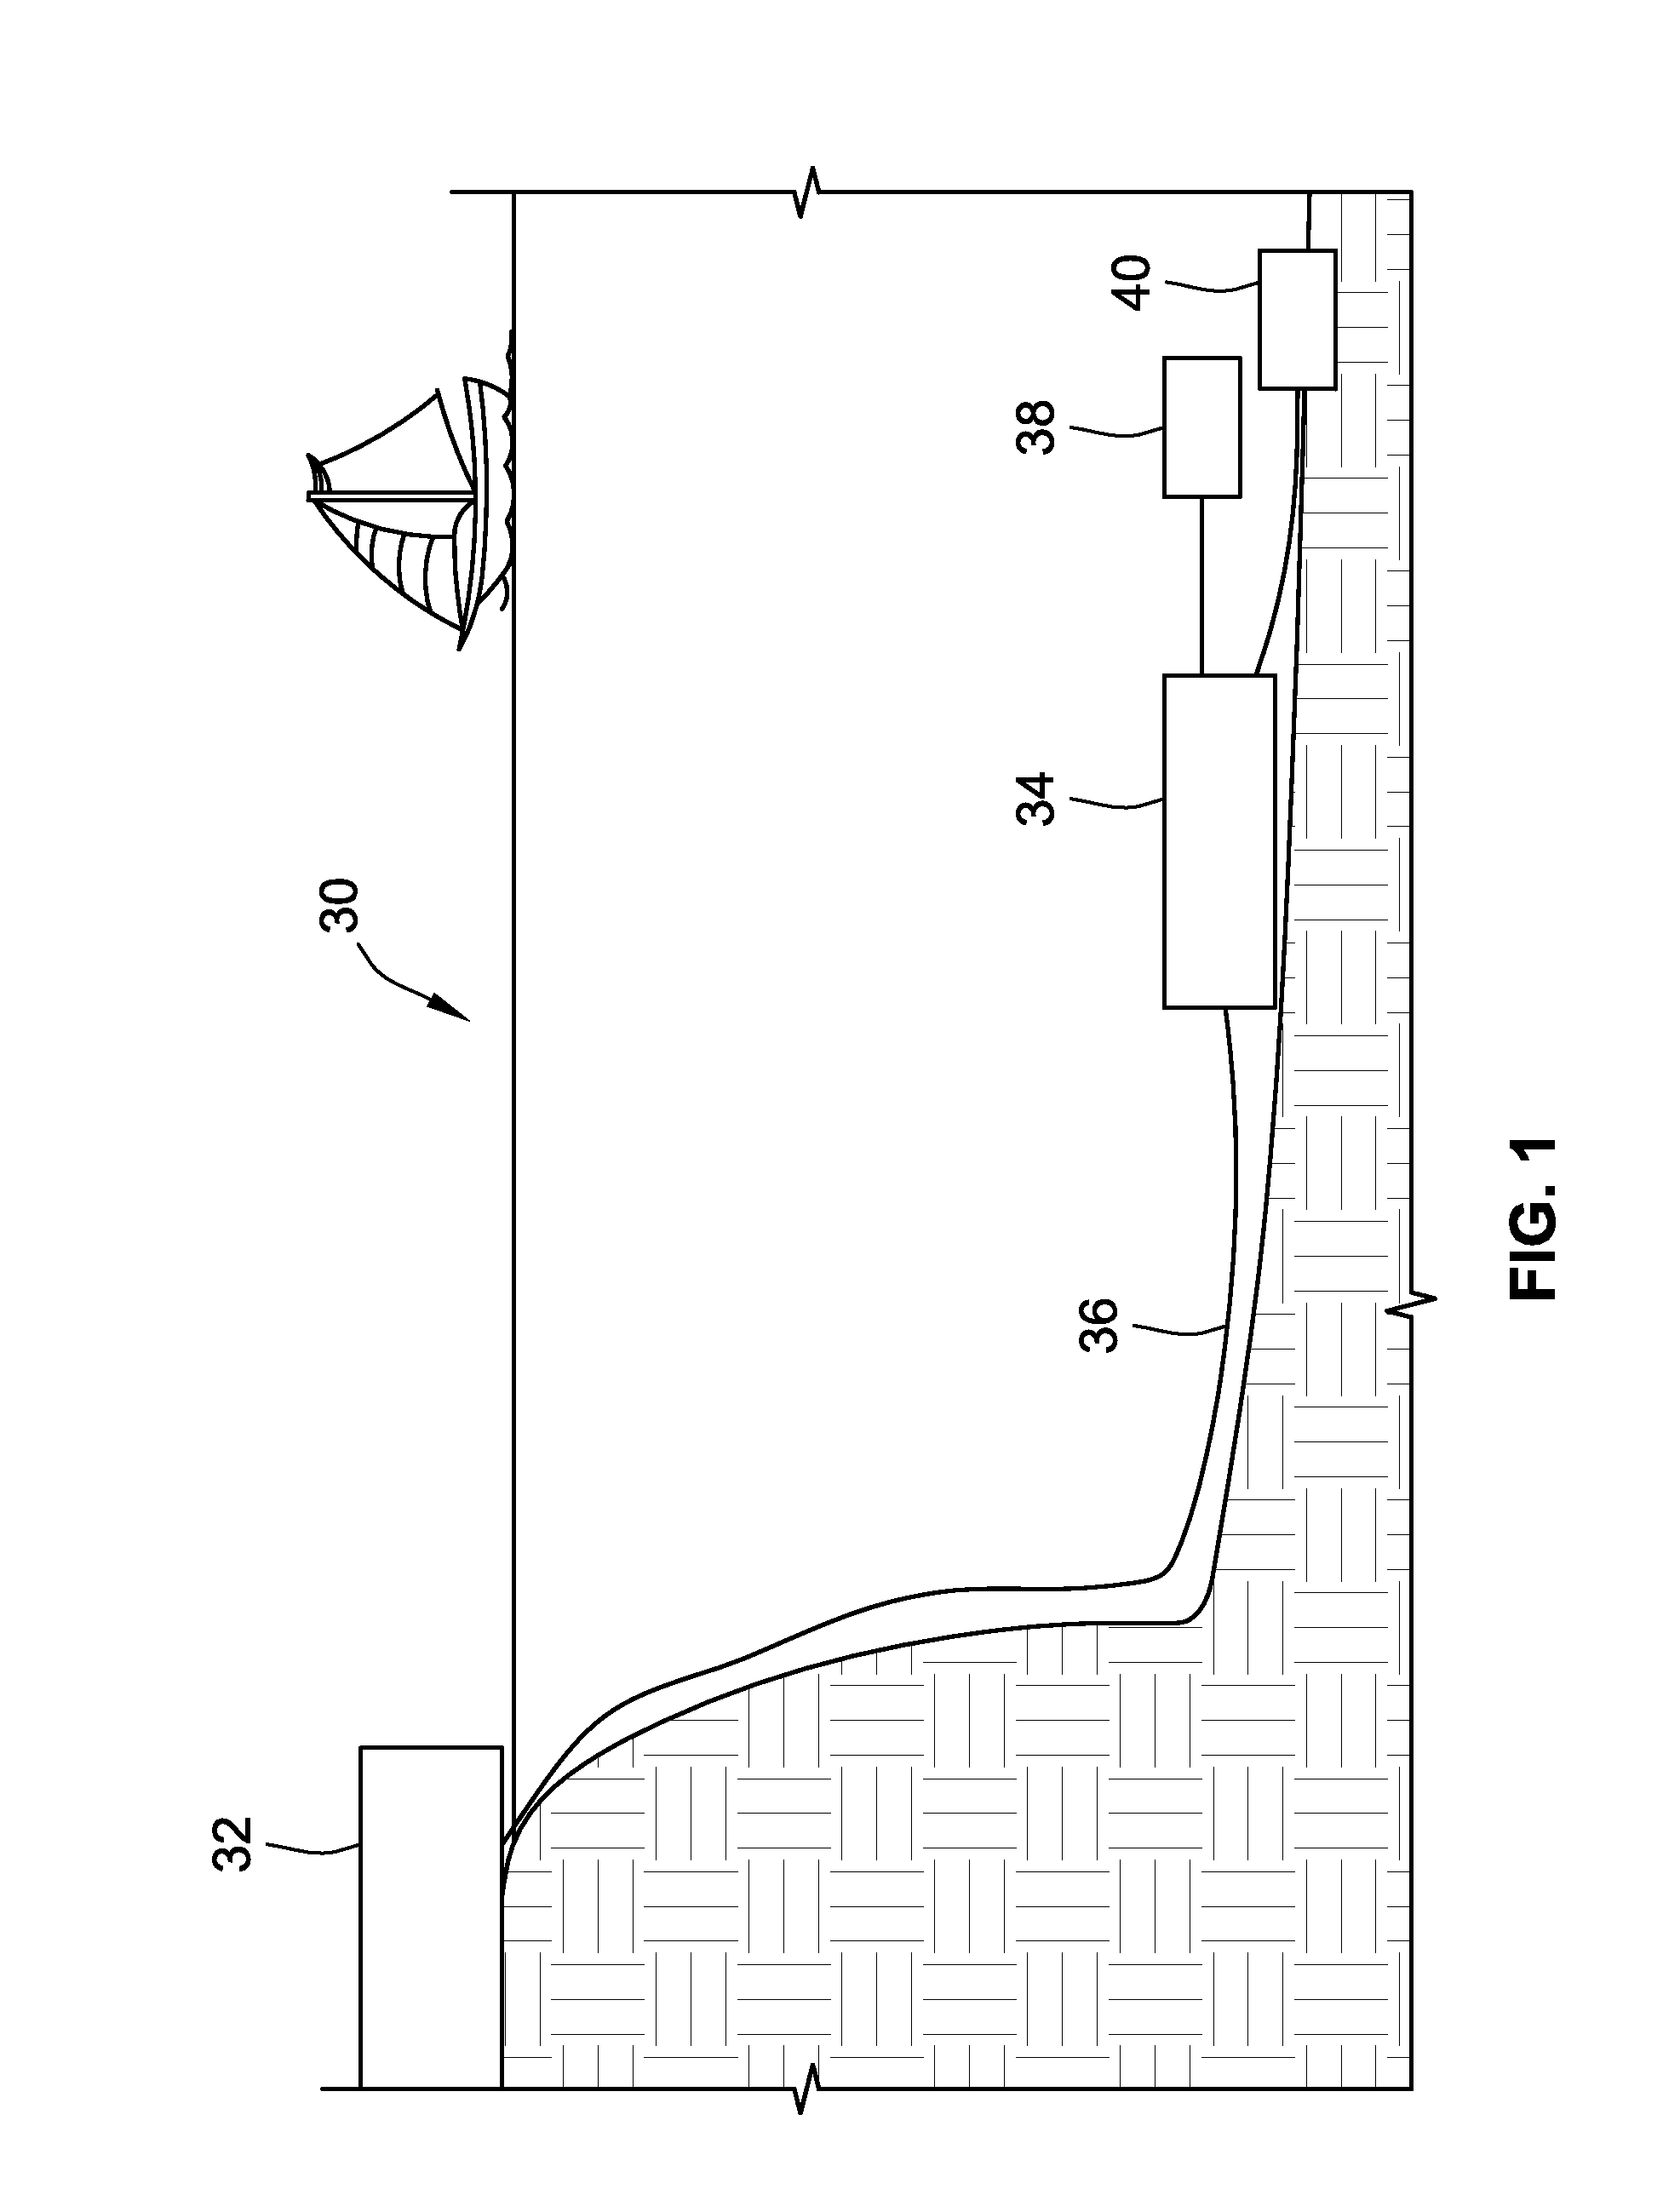 Subsea Electrical Distribution System Having a Modular Subsea Circuit Breaker and Method for Assembling Same